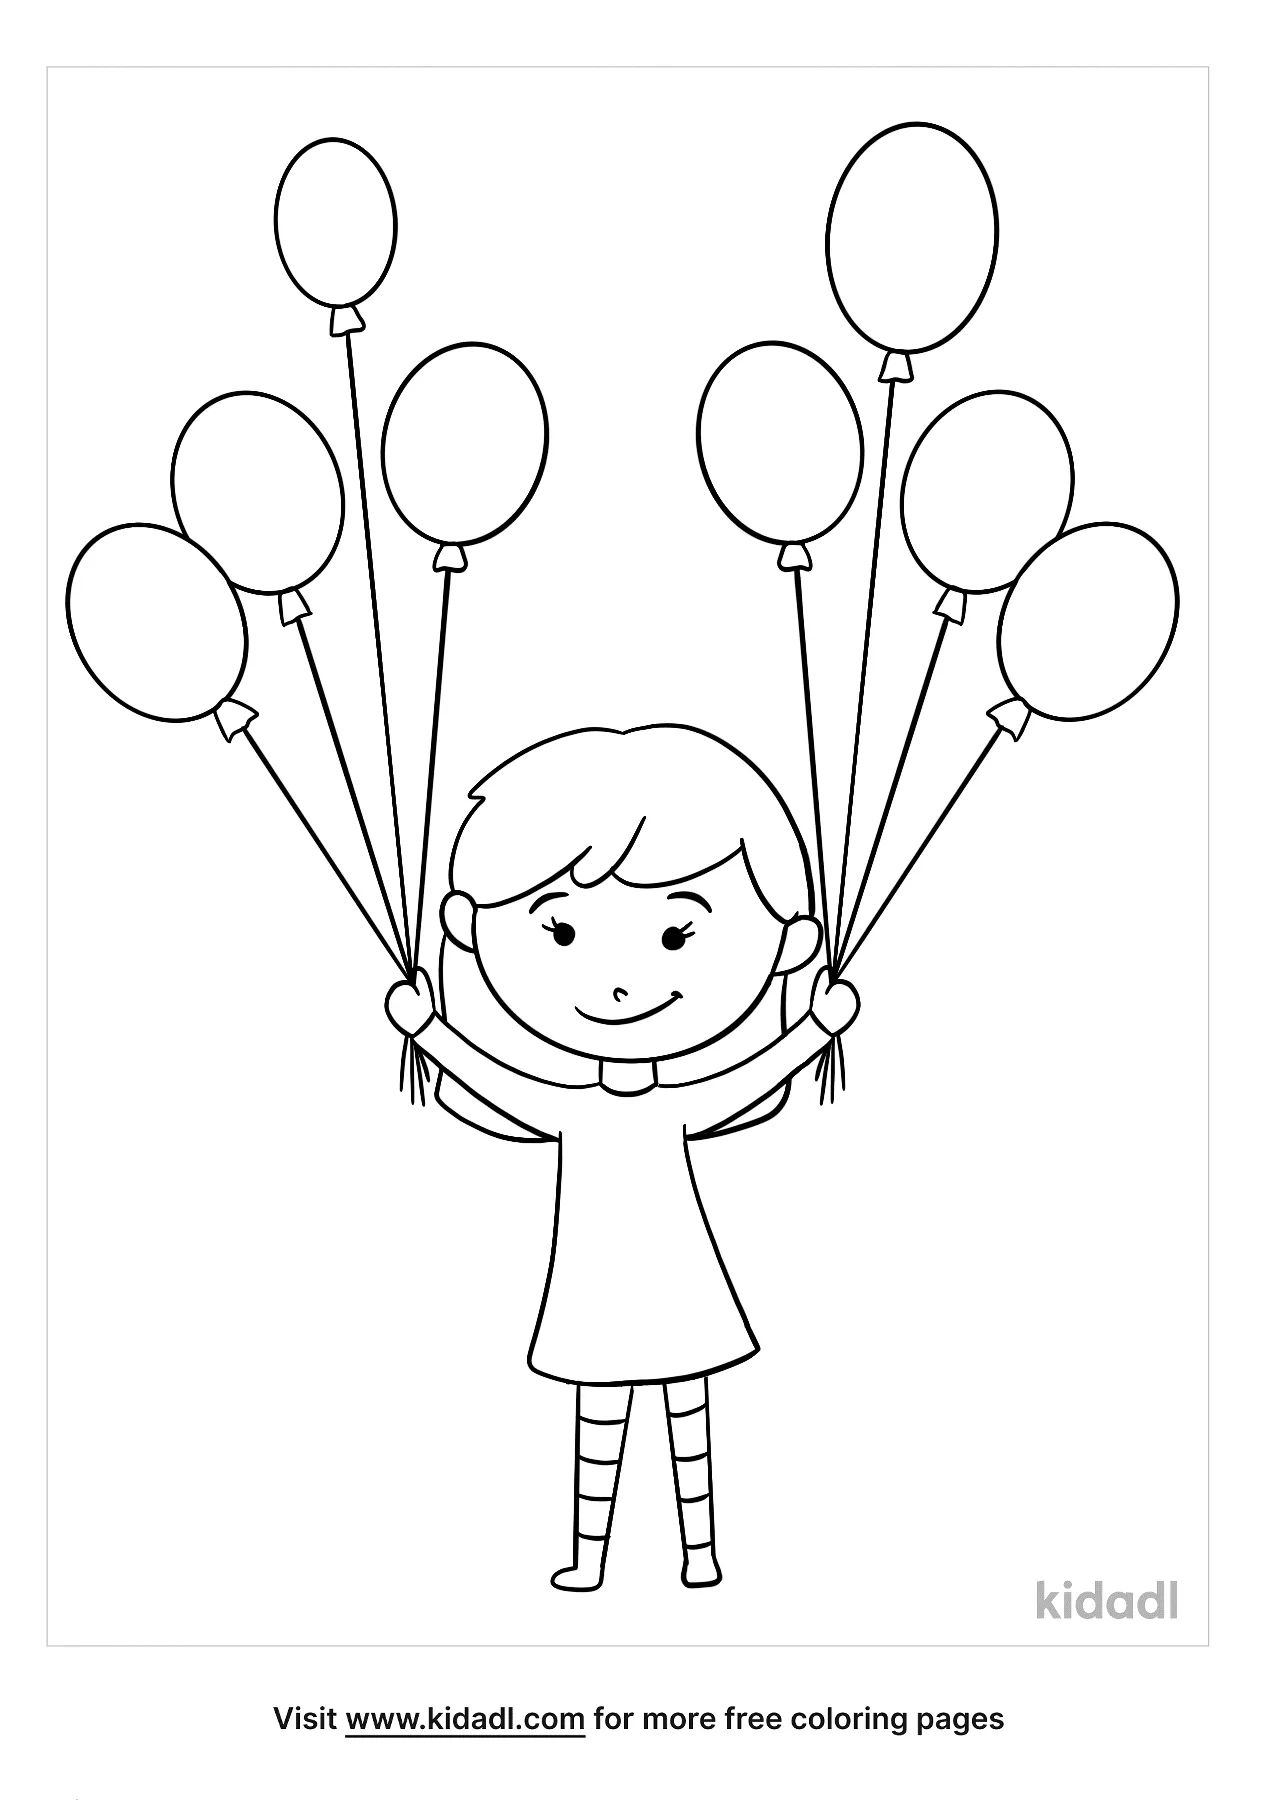 Little Girl Holding Balloons Coloring Page